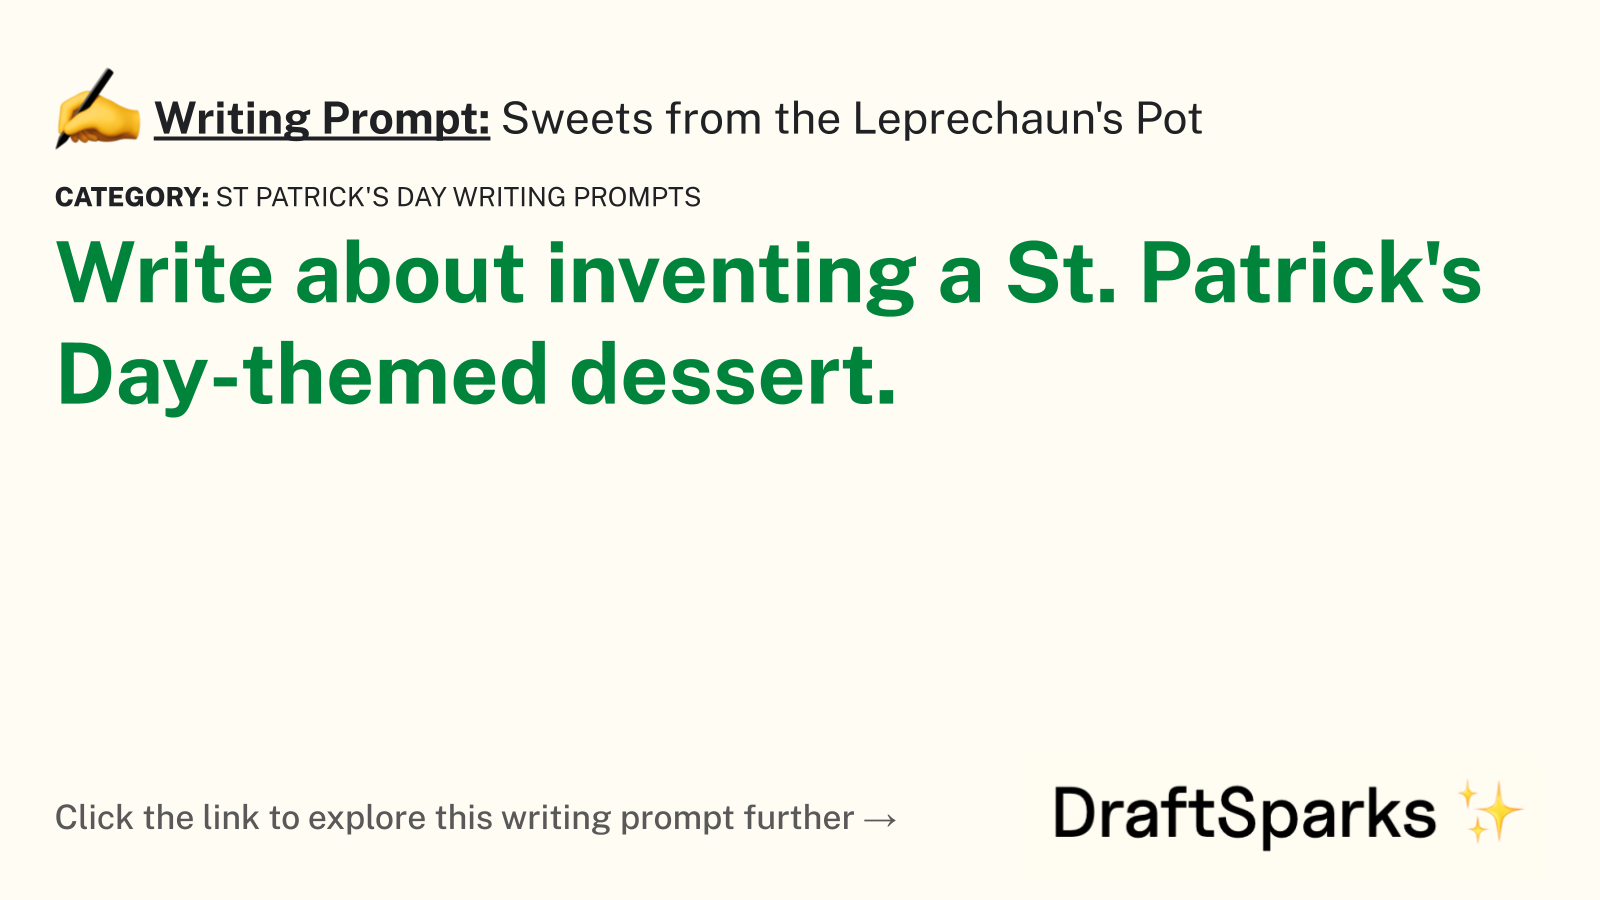 Sweets from the Leprechaun’s Pot